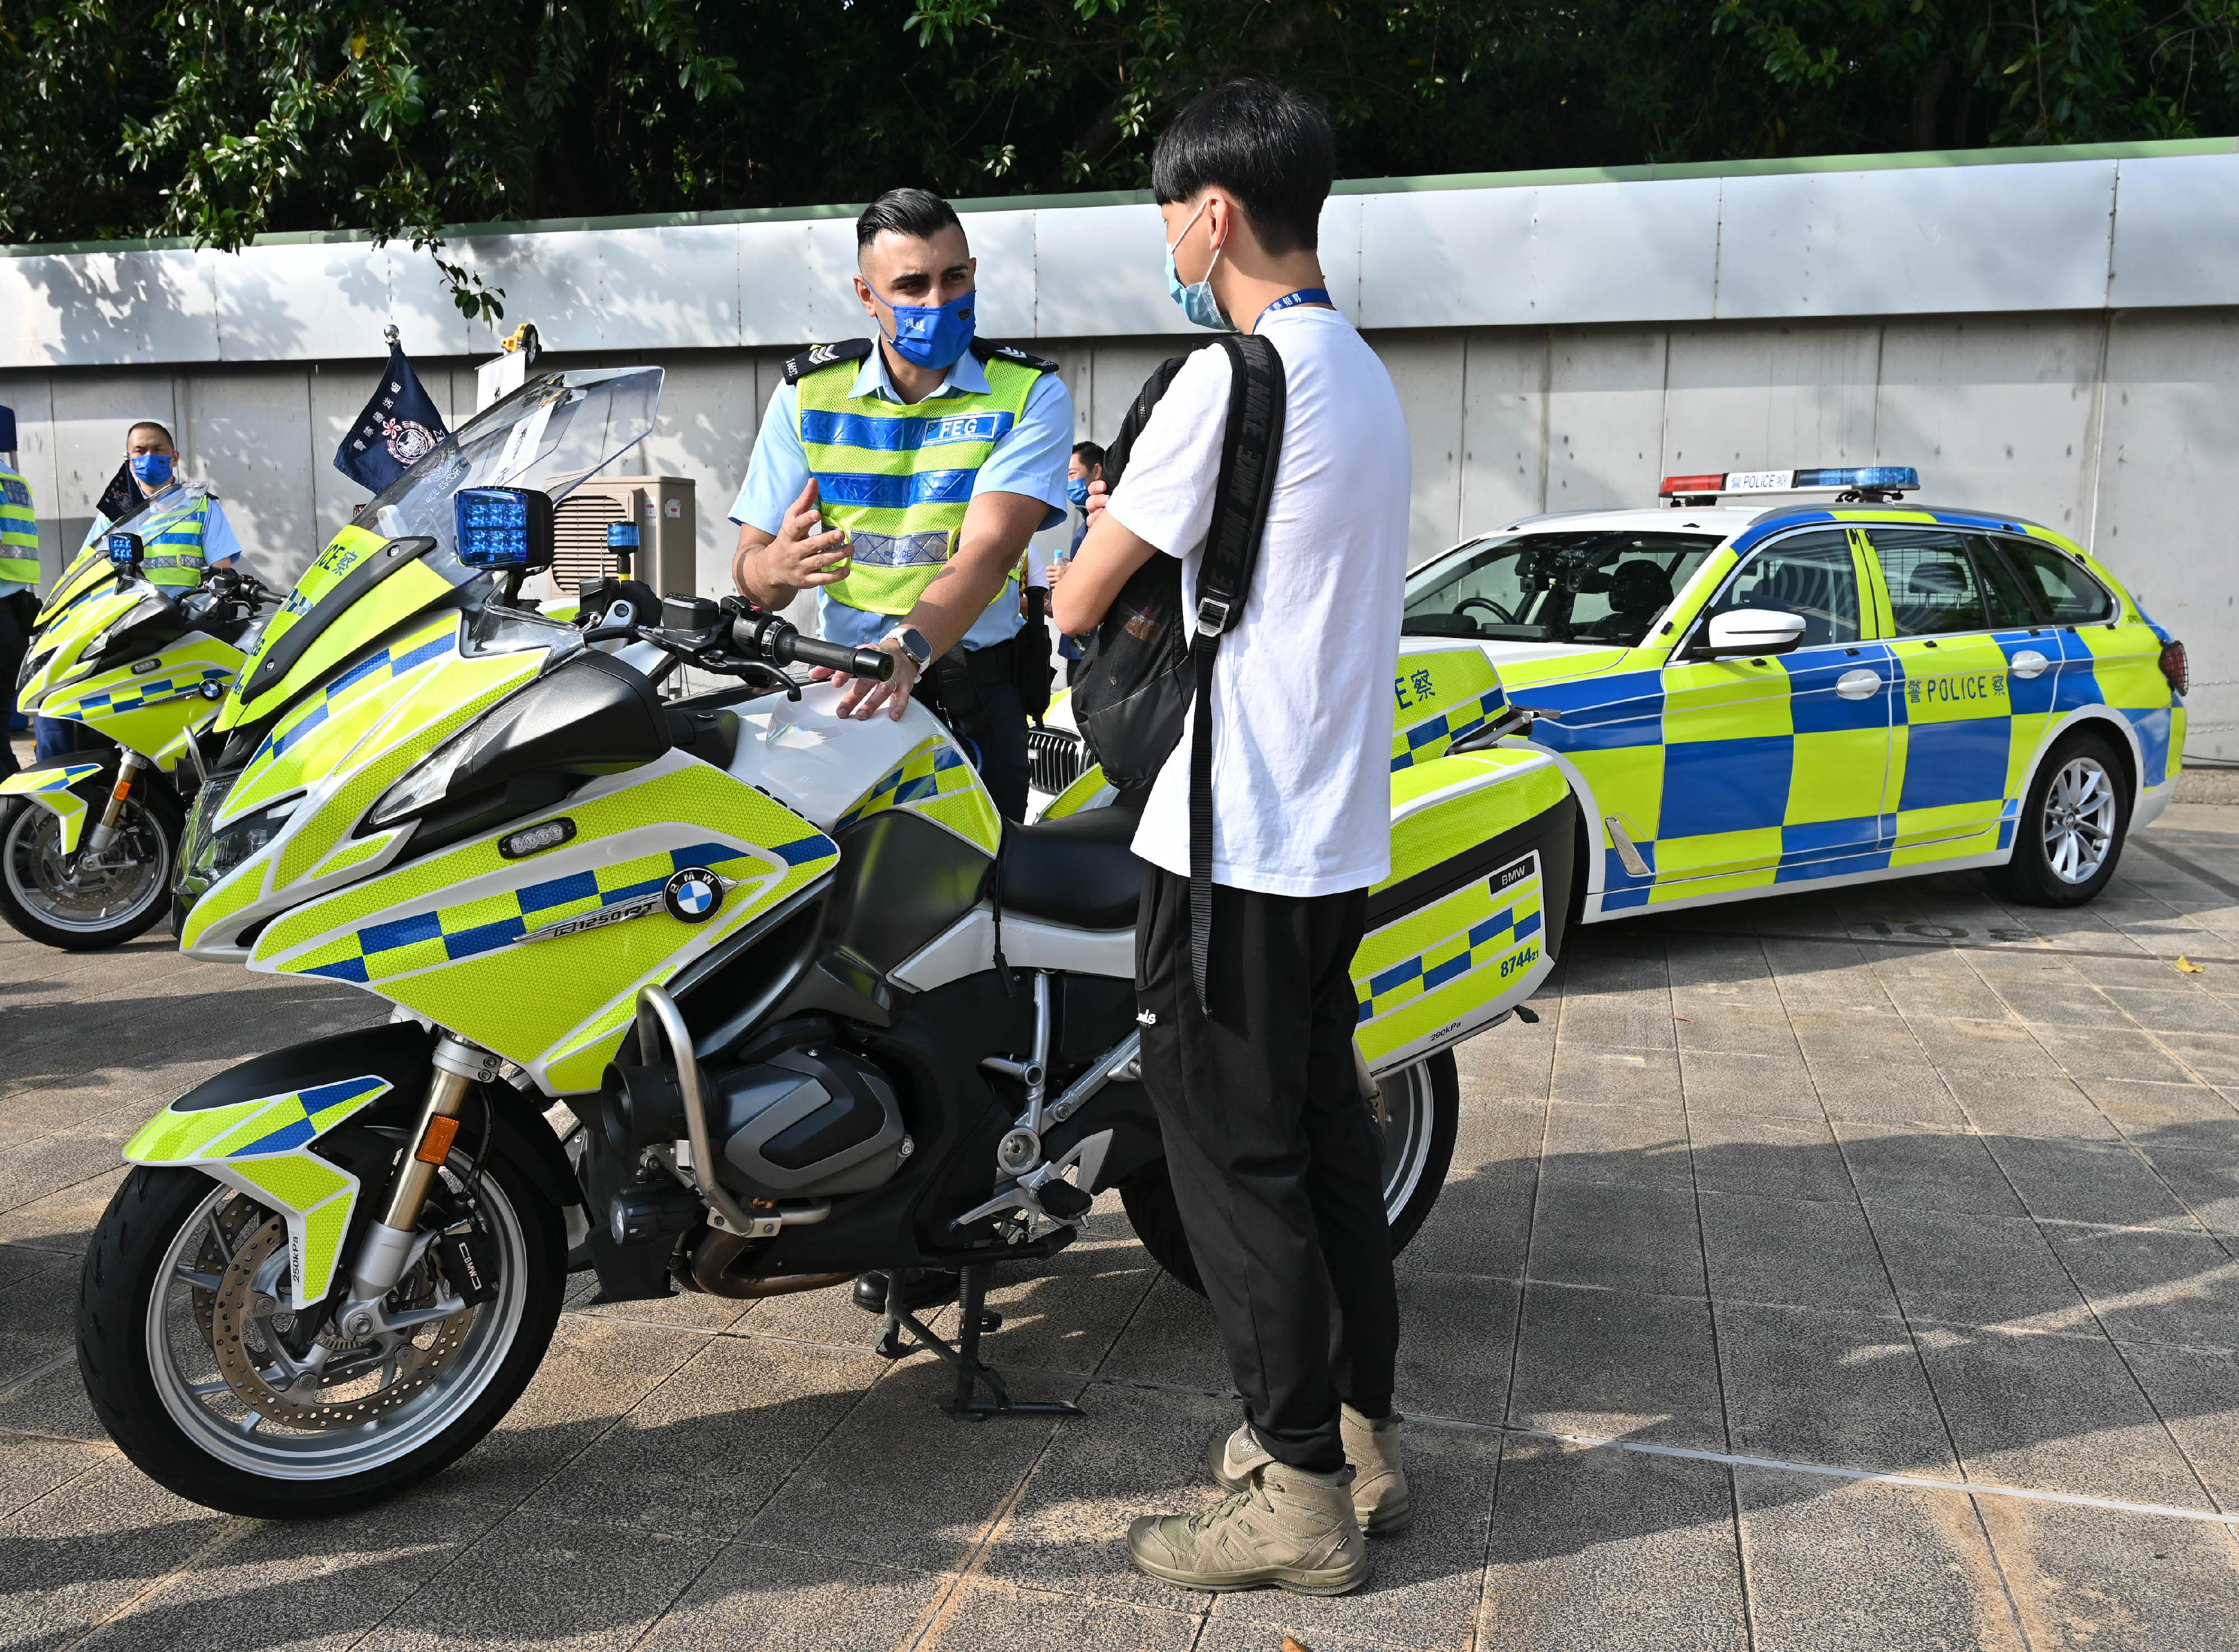 The Hong Kong Police Force today (November 20) organised the Police Recruitment Experience and Assessment Day at the Hong Kong Police College. Photo shows an officer from the Traffic Unit introducing their work to a participant.